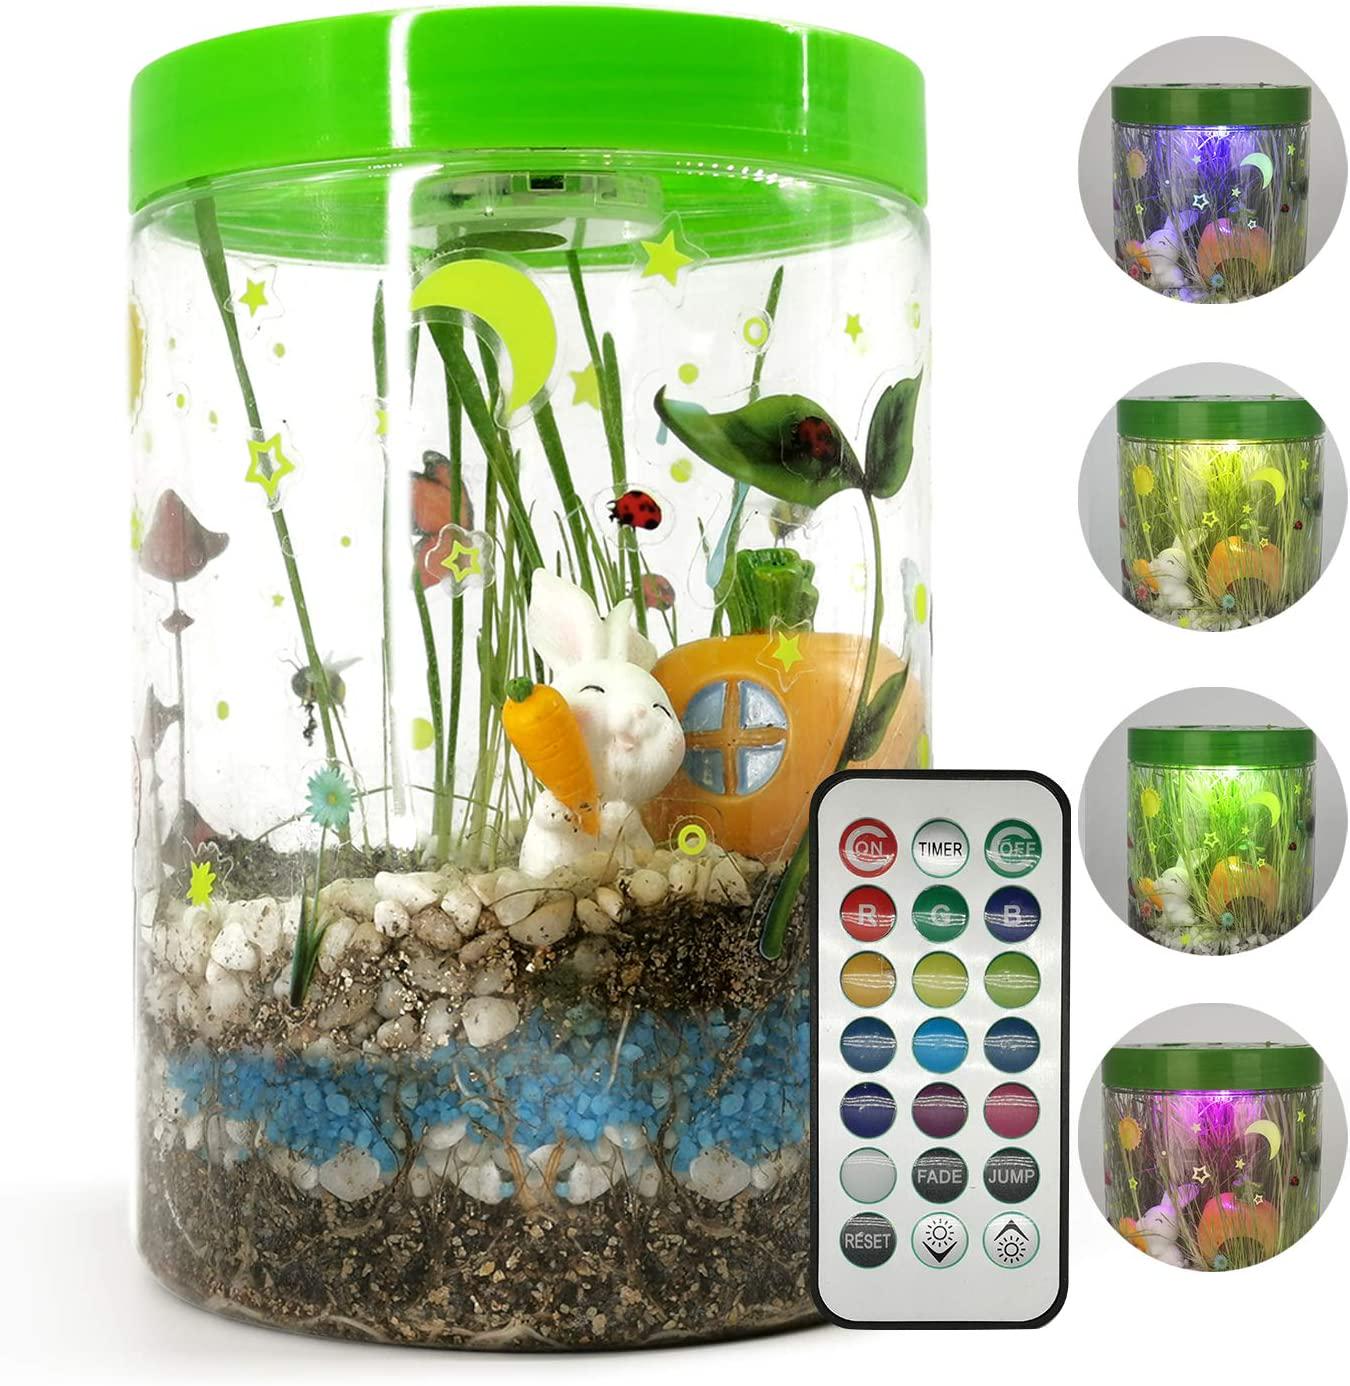 FEAYEA, Light-up Terrarium Kit for Kids with LED Light on Lid- STEM Educational DIY Science Project - Create Your Own Customized Mini Garden in a Jar That Glows at Night - for Boys and Girls Age 5-12 Kids Toys